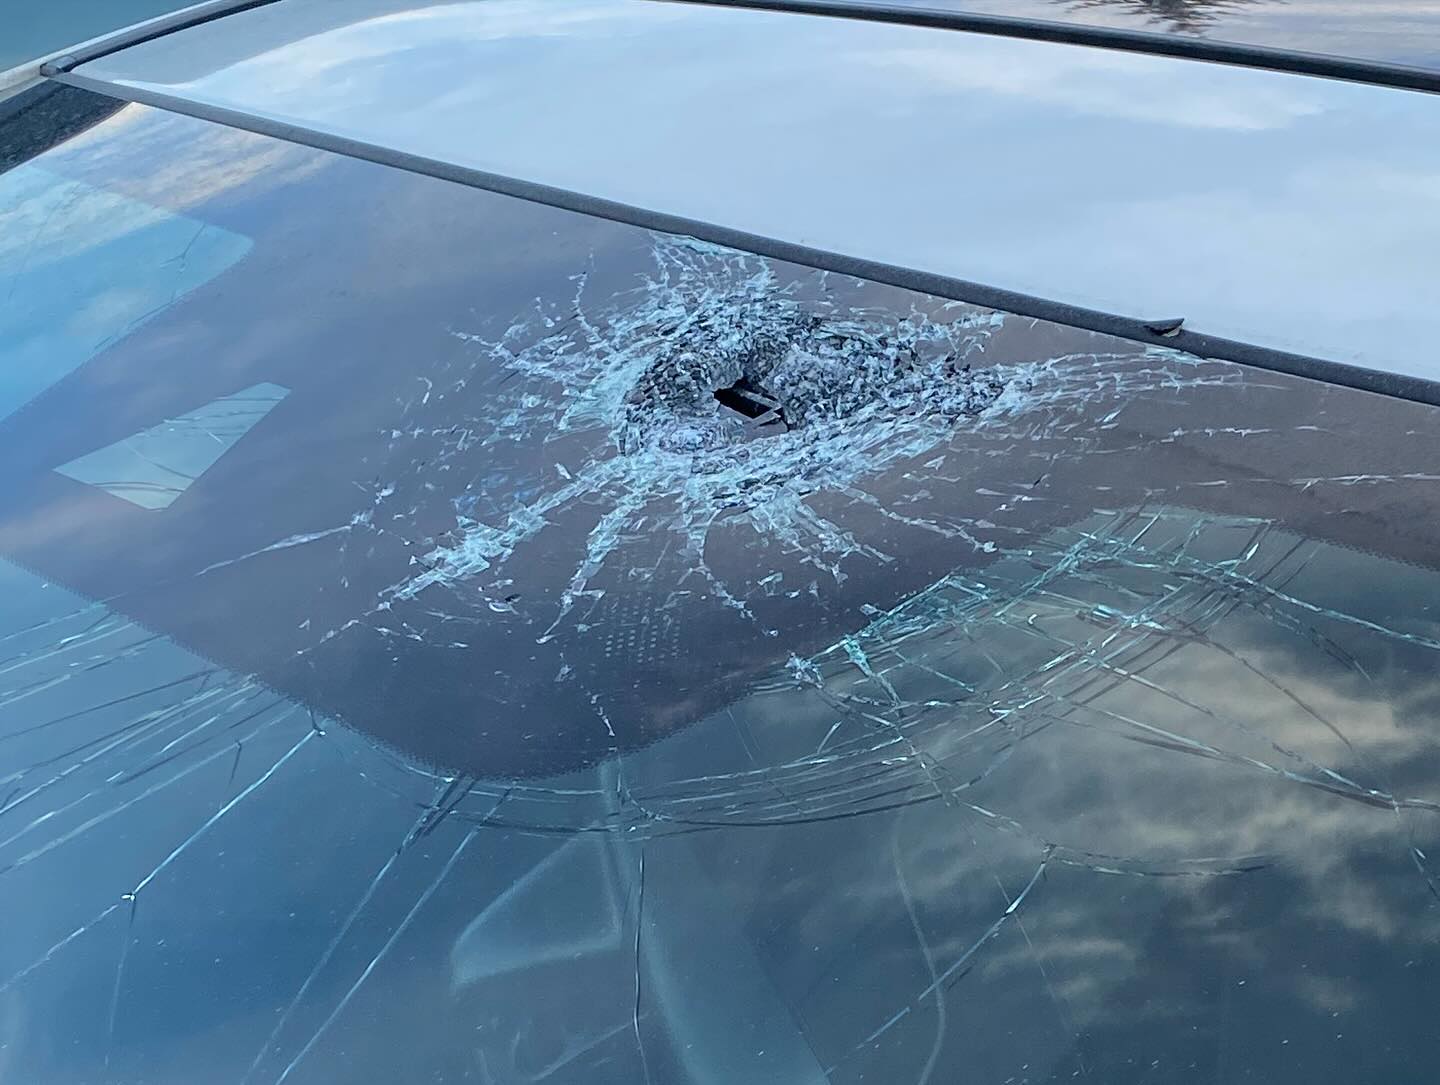 Rock through windshield on Whitemud Drive rattles Edmonton woman: ‘Could have killed somebody’